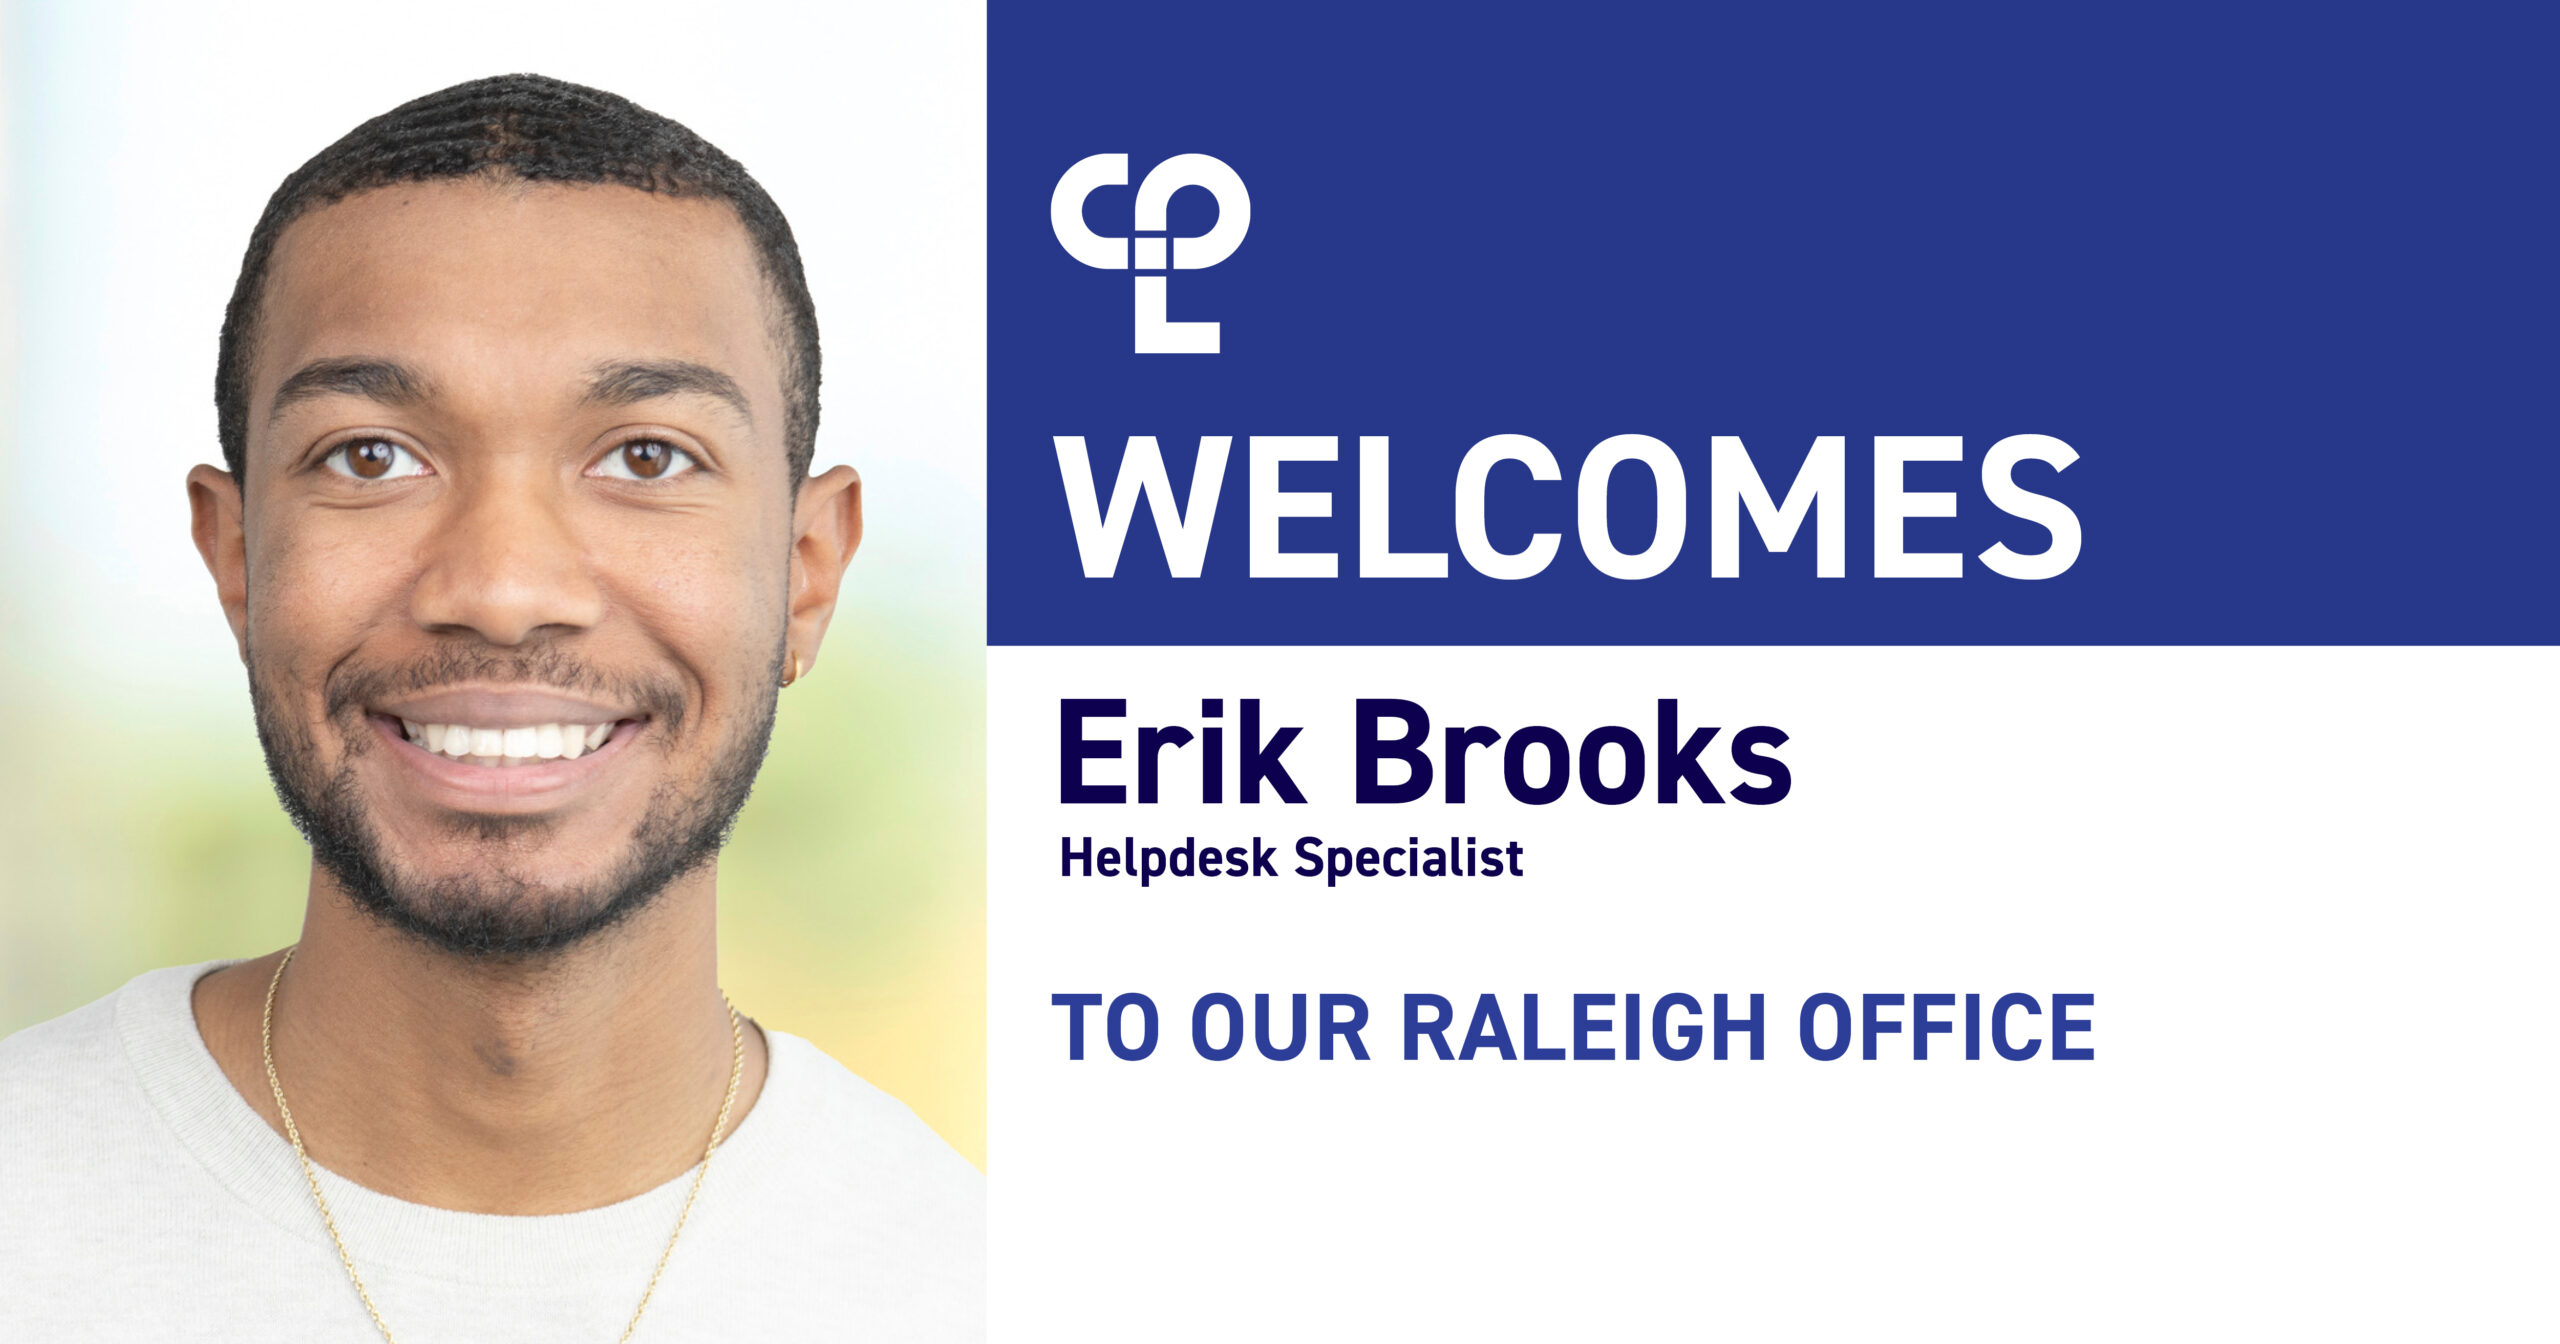 Man in white shirt smiling next to text that reads "CPL Welcomes Erik Brooks, HelpDesk Specialist, to our Raleigh office"